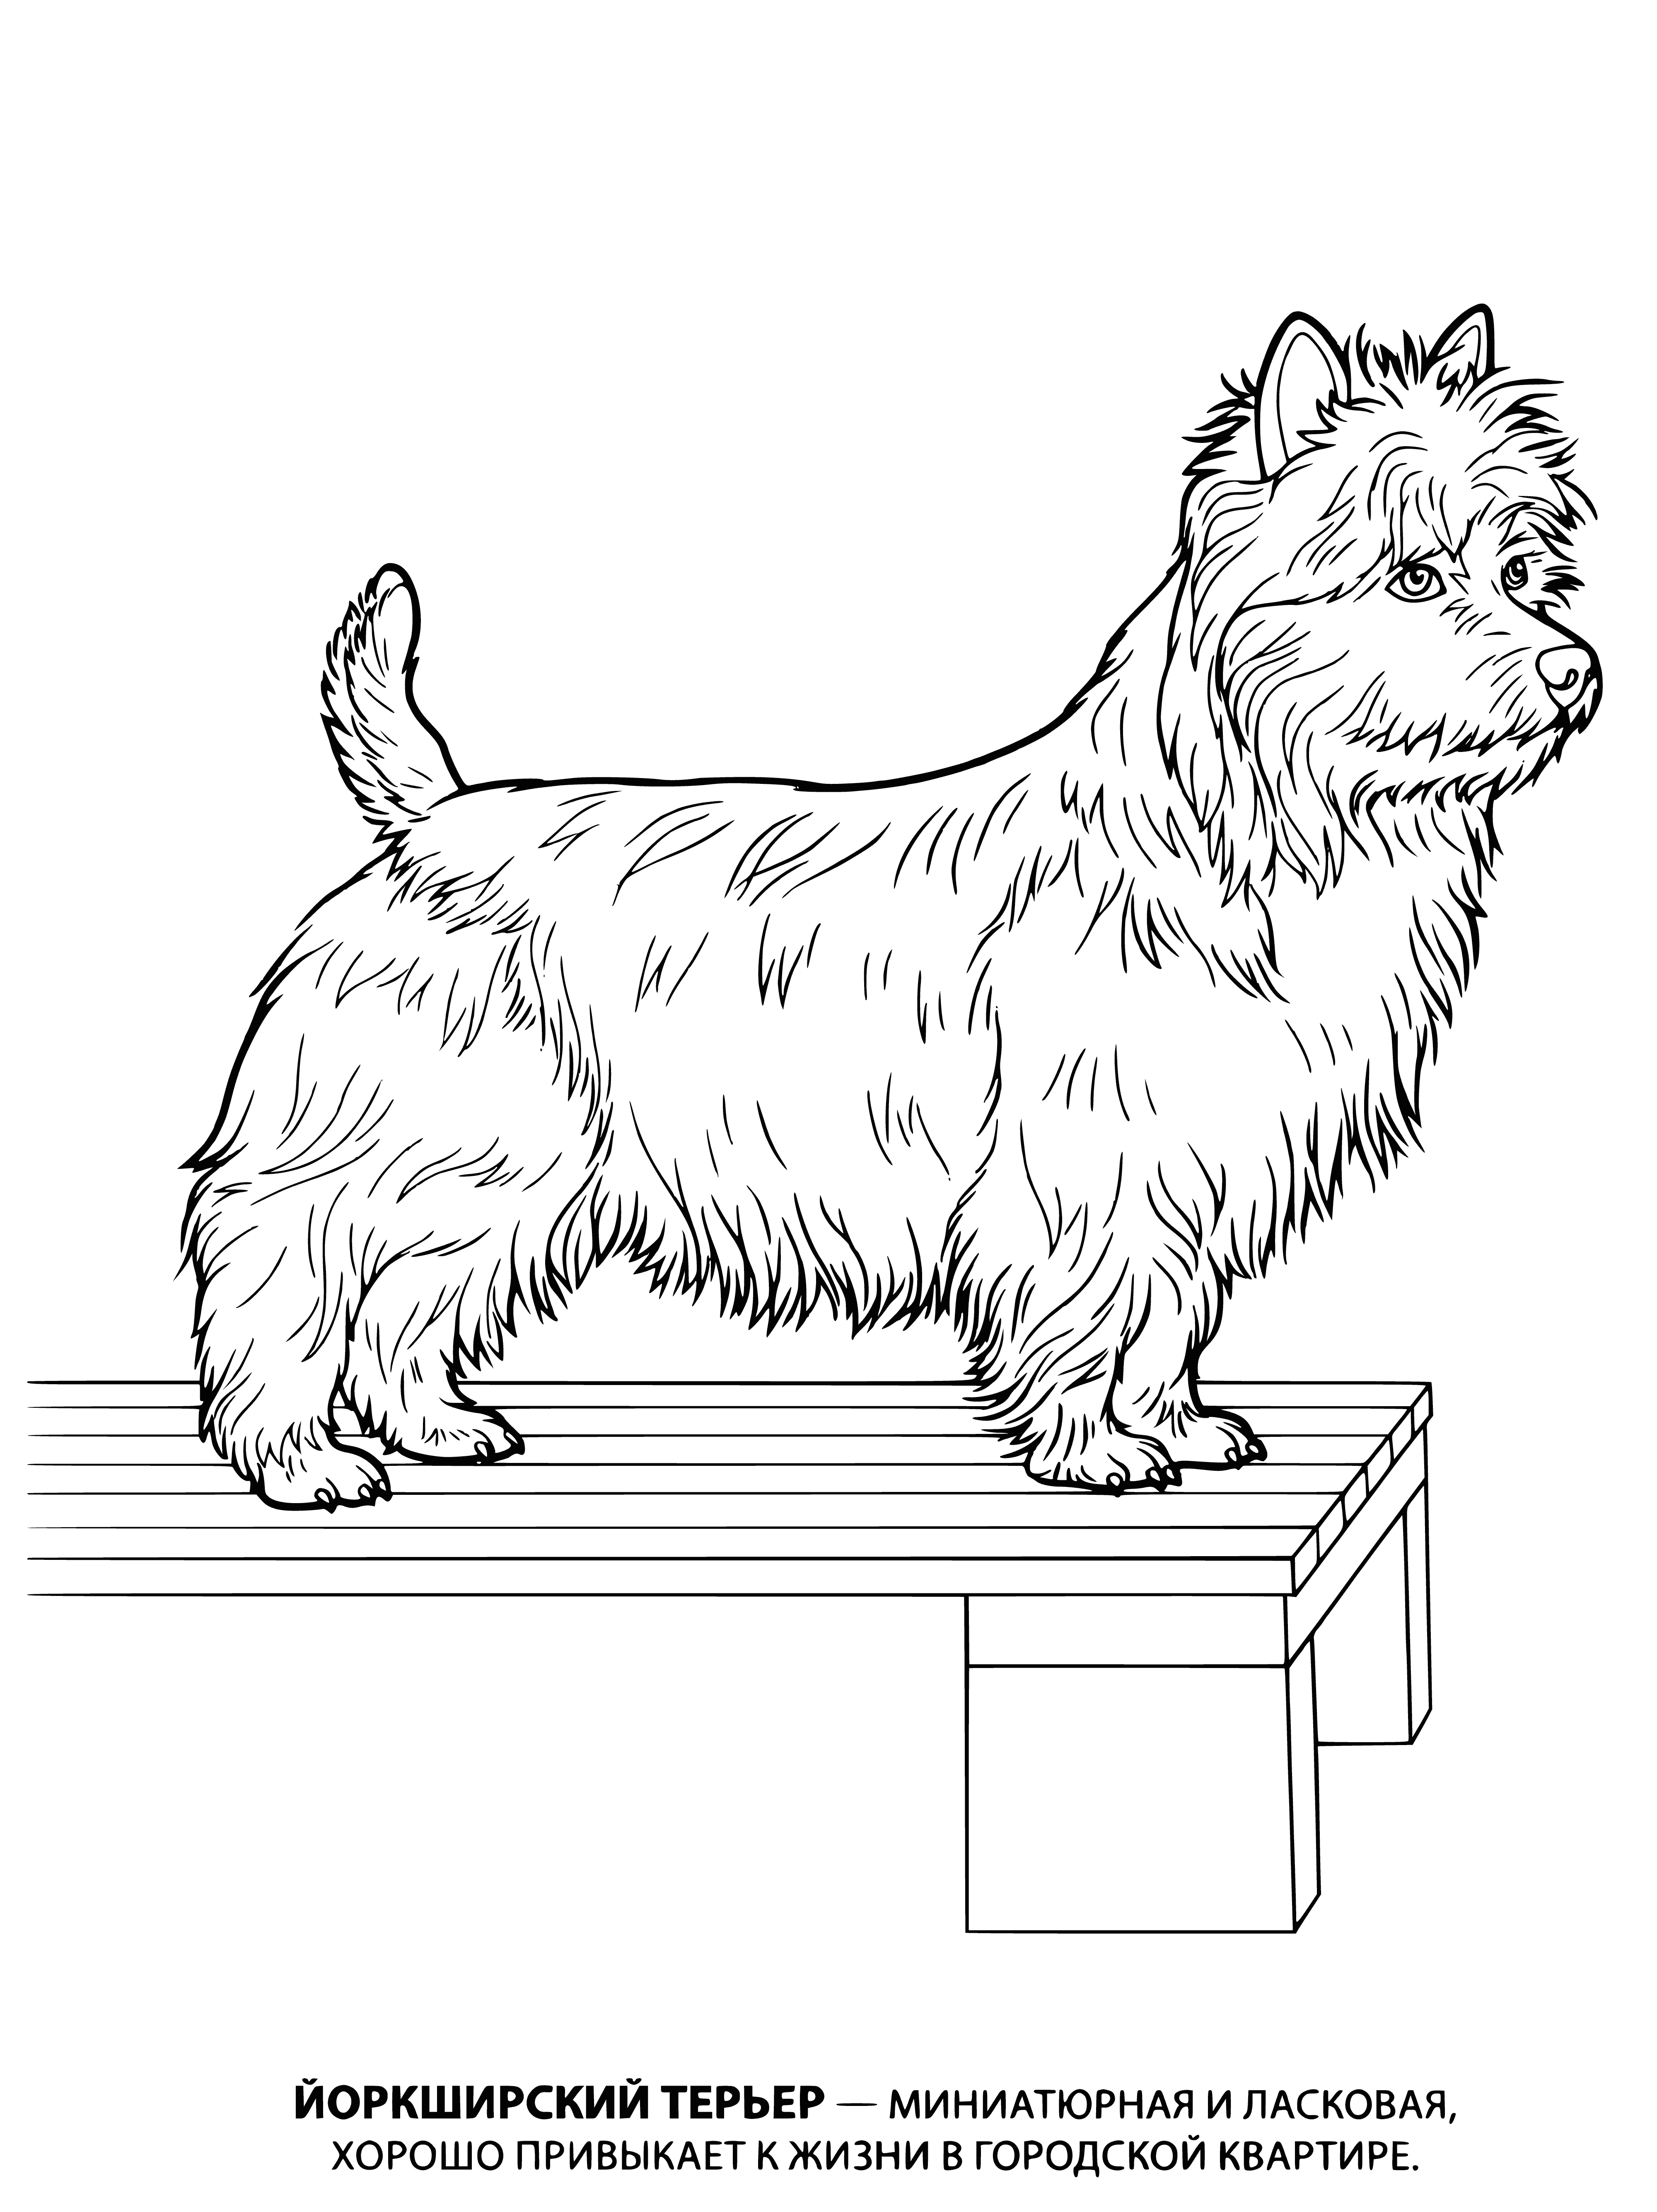 coloring page: Small long-haired dog w/ black/brown coat, tan head, floppy ears, long tail.